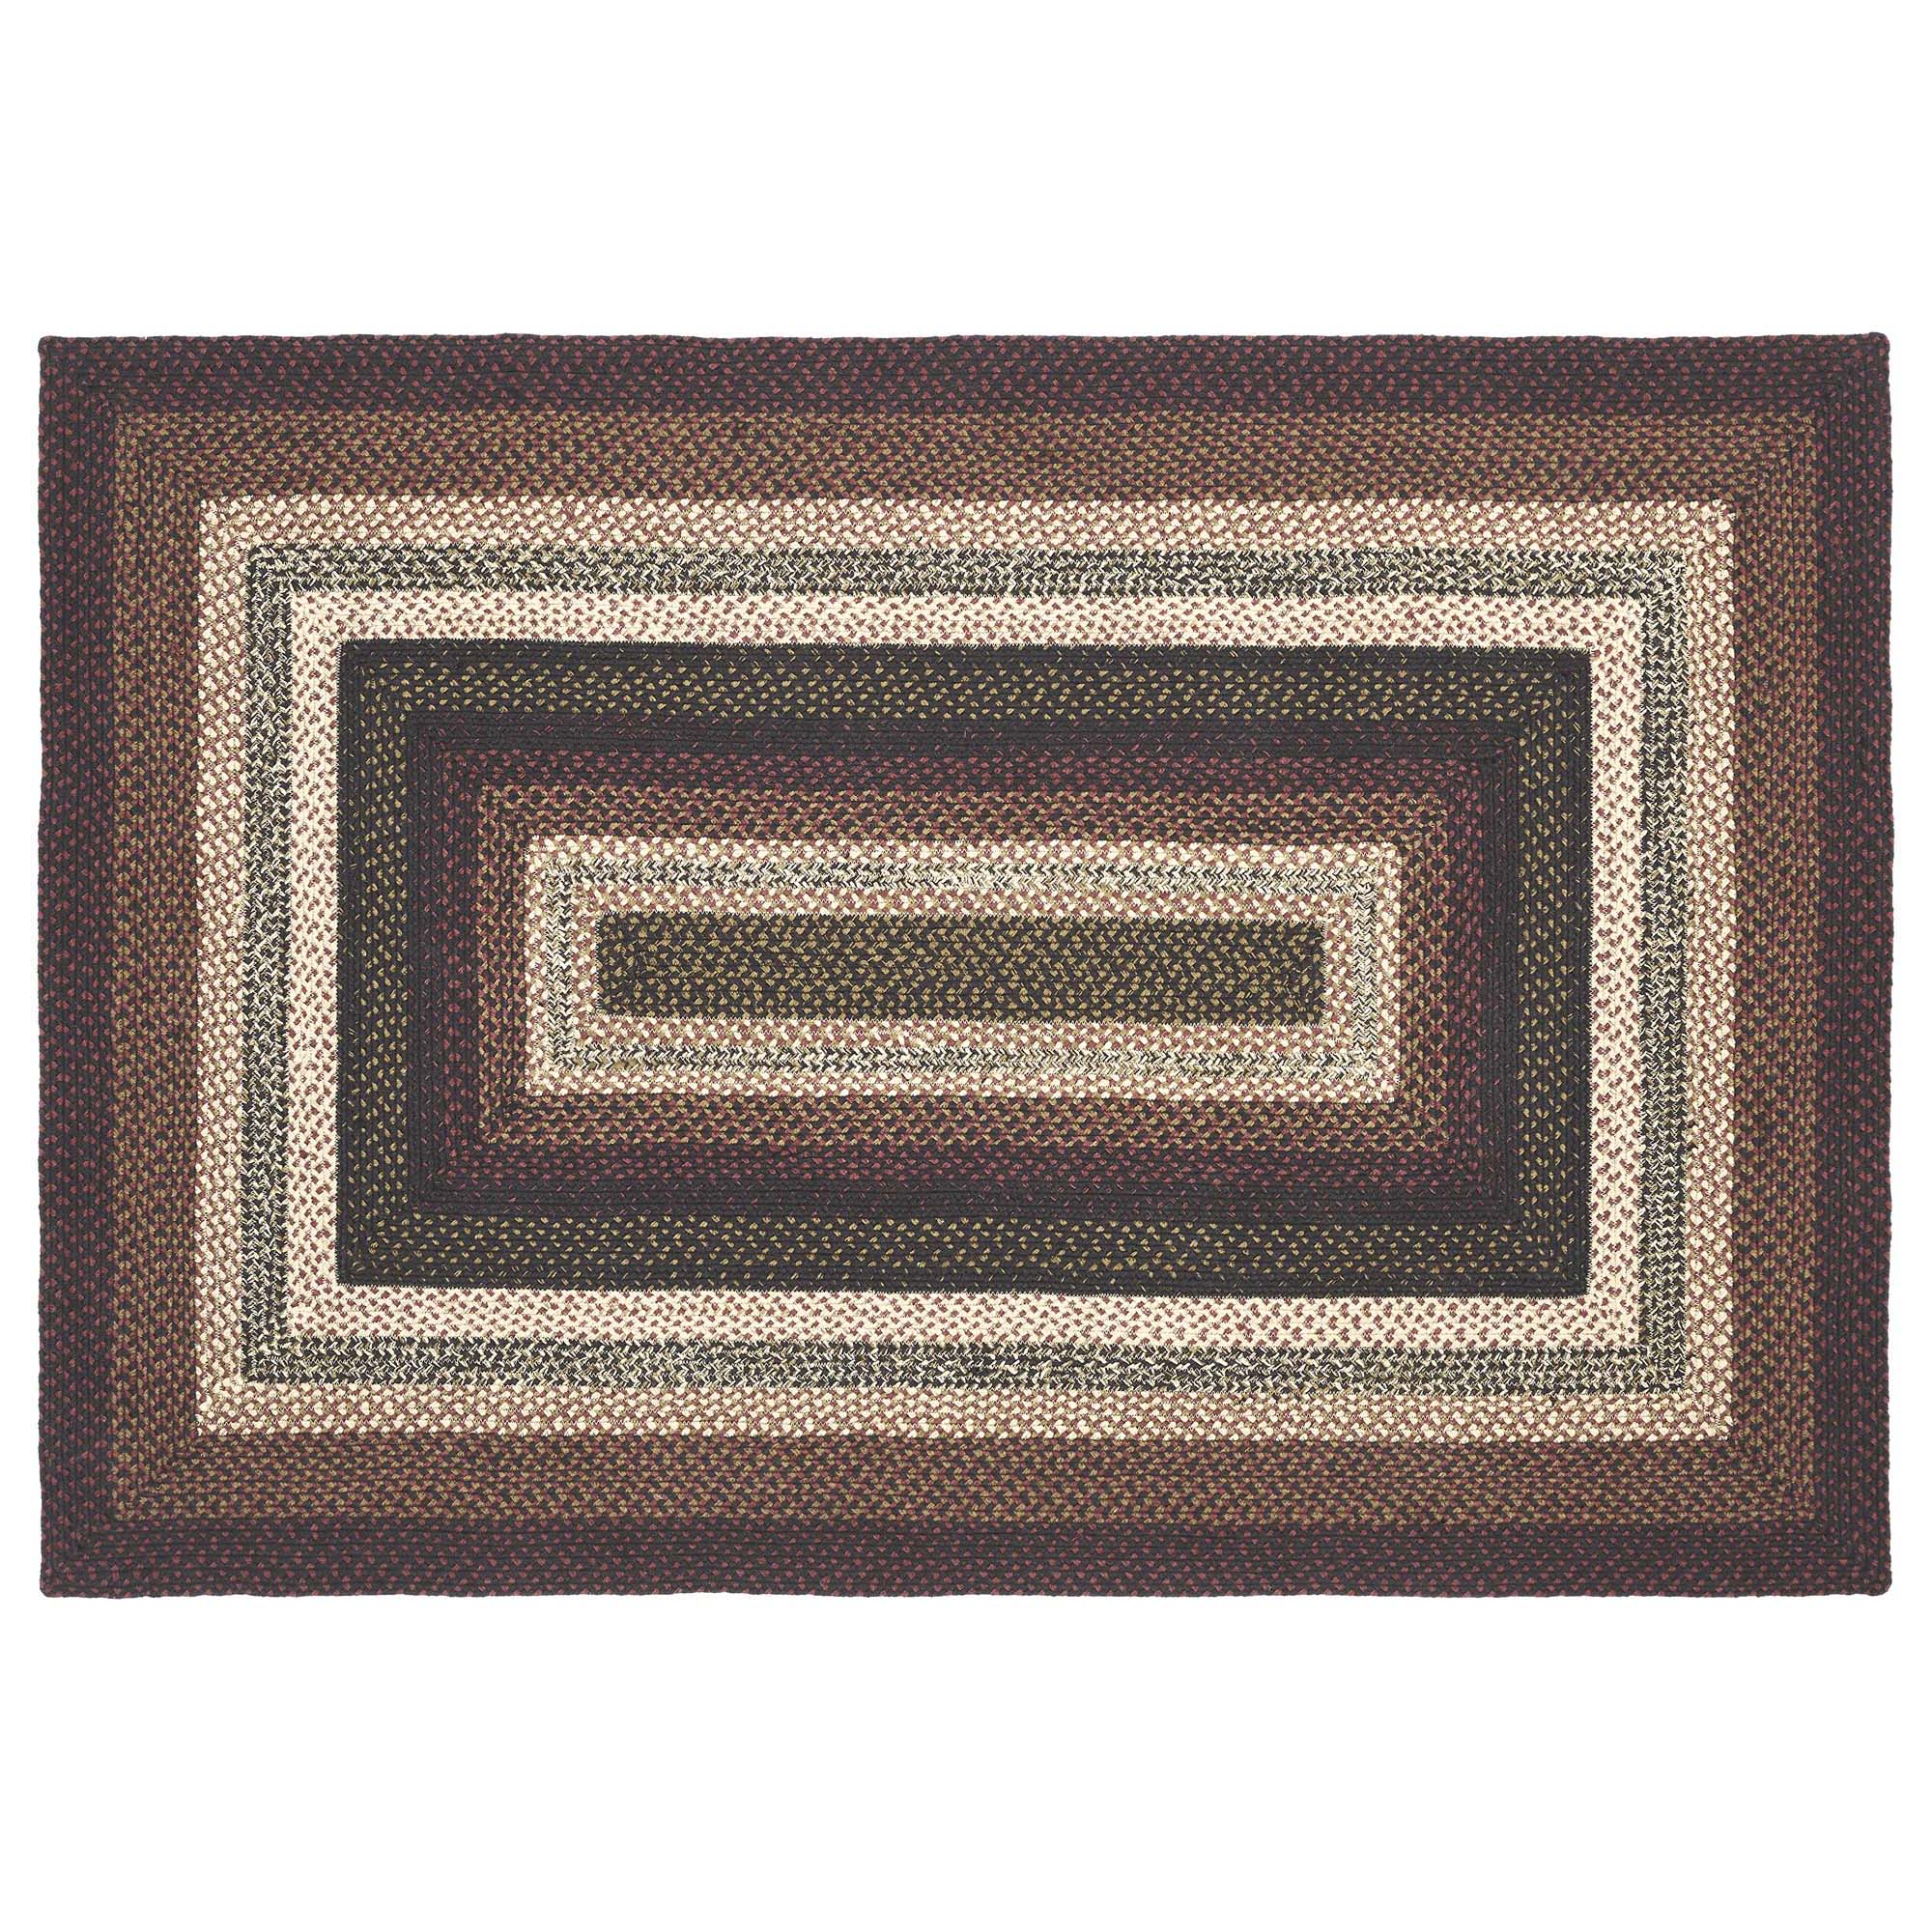 Beckham Jute Braided Rug Rect with Rug Pad 4'x6' VHC Brands